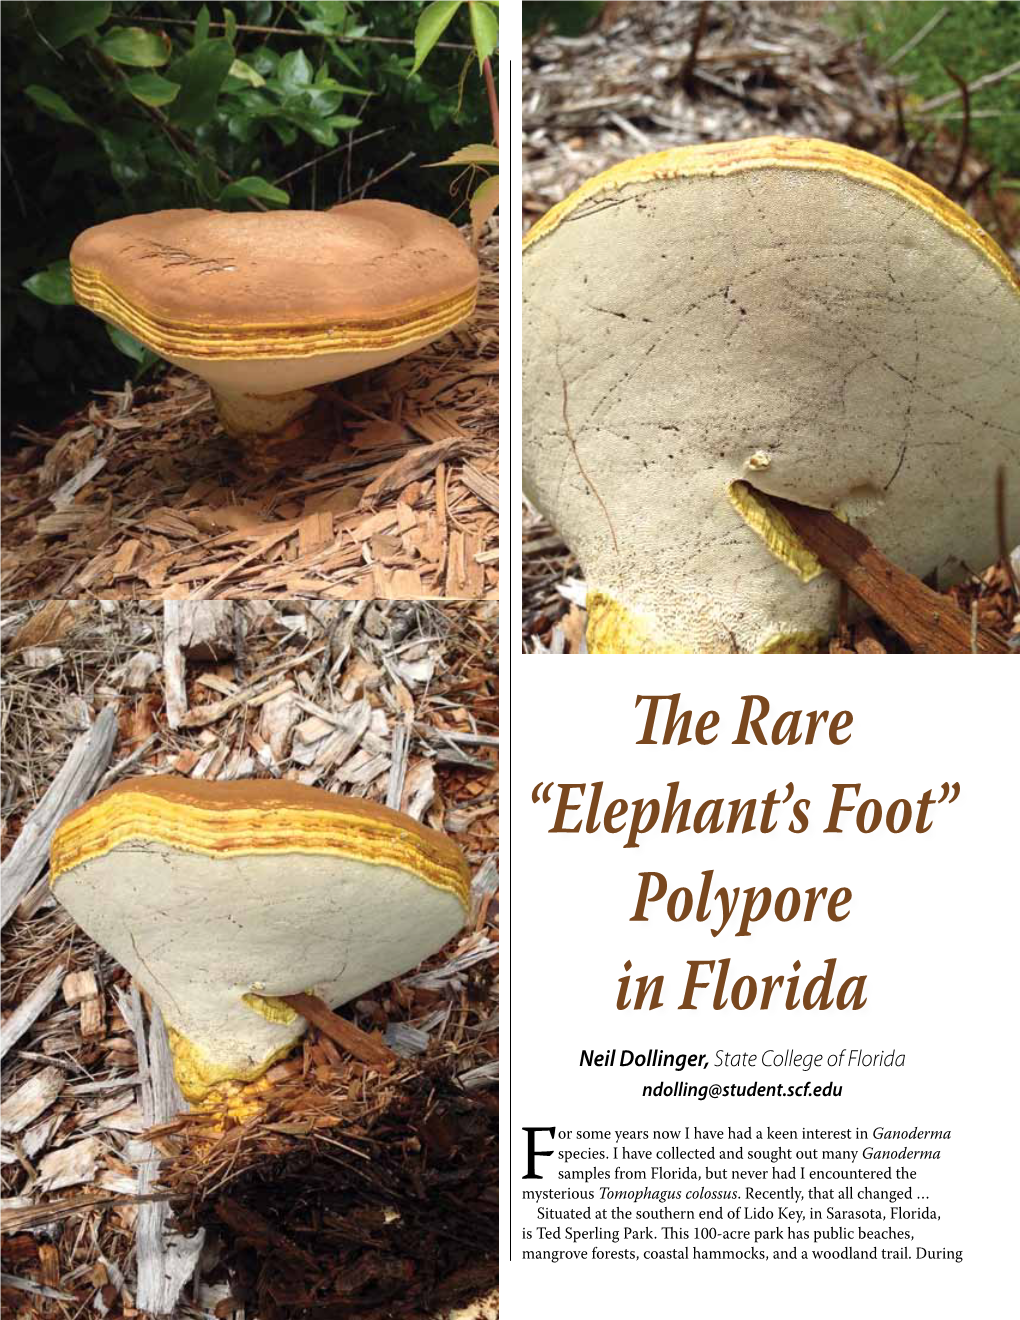 The Rare “Elephant's Foot” Polypore in Florida